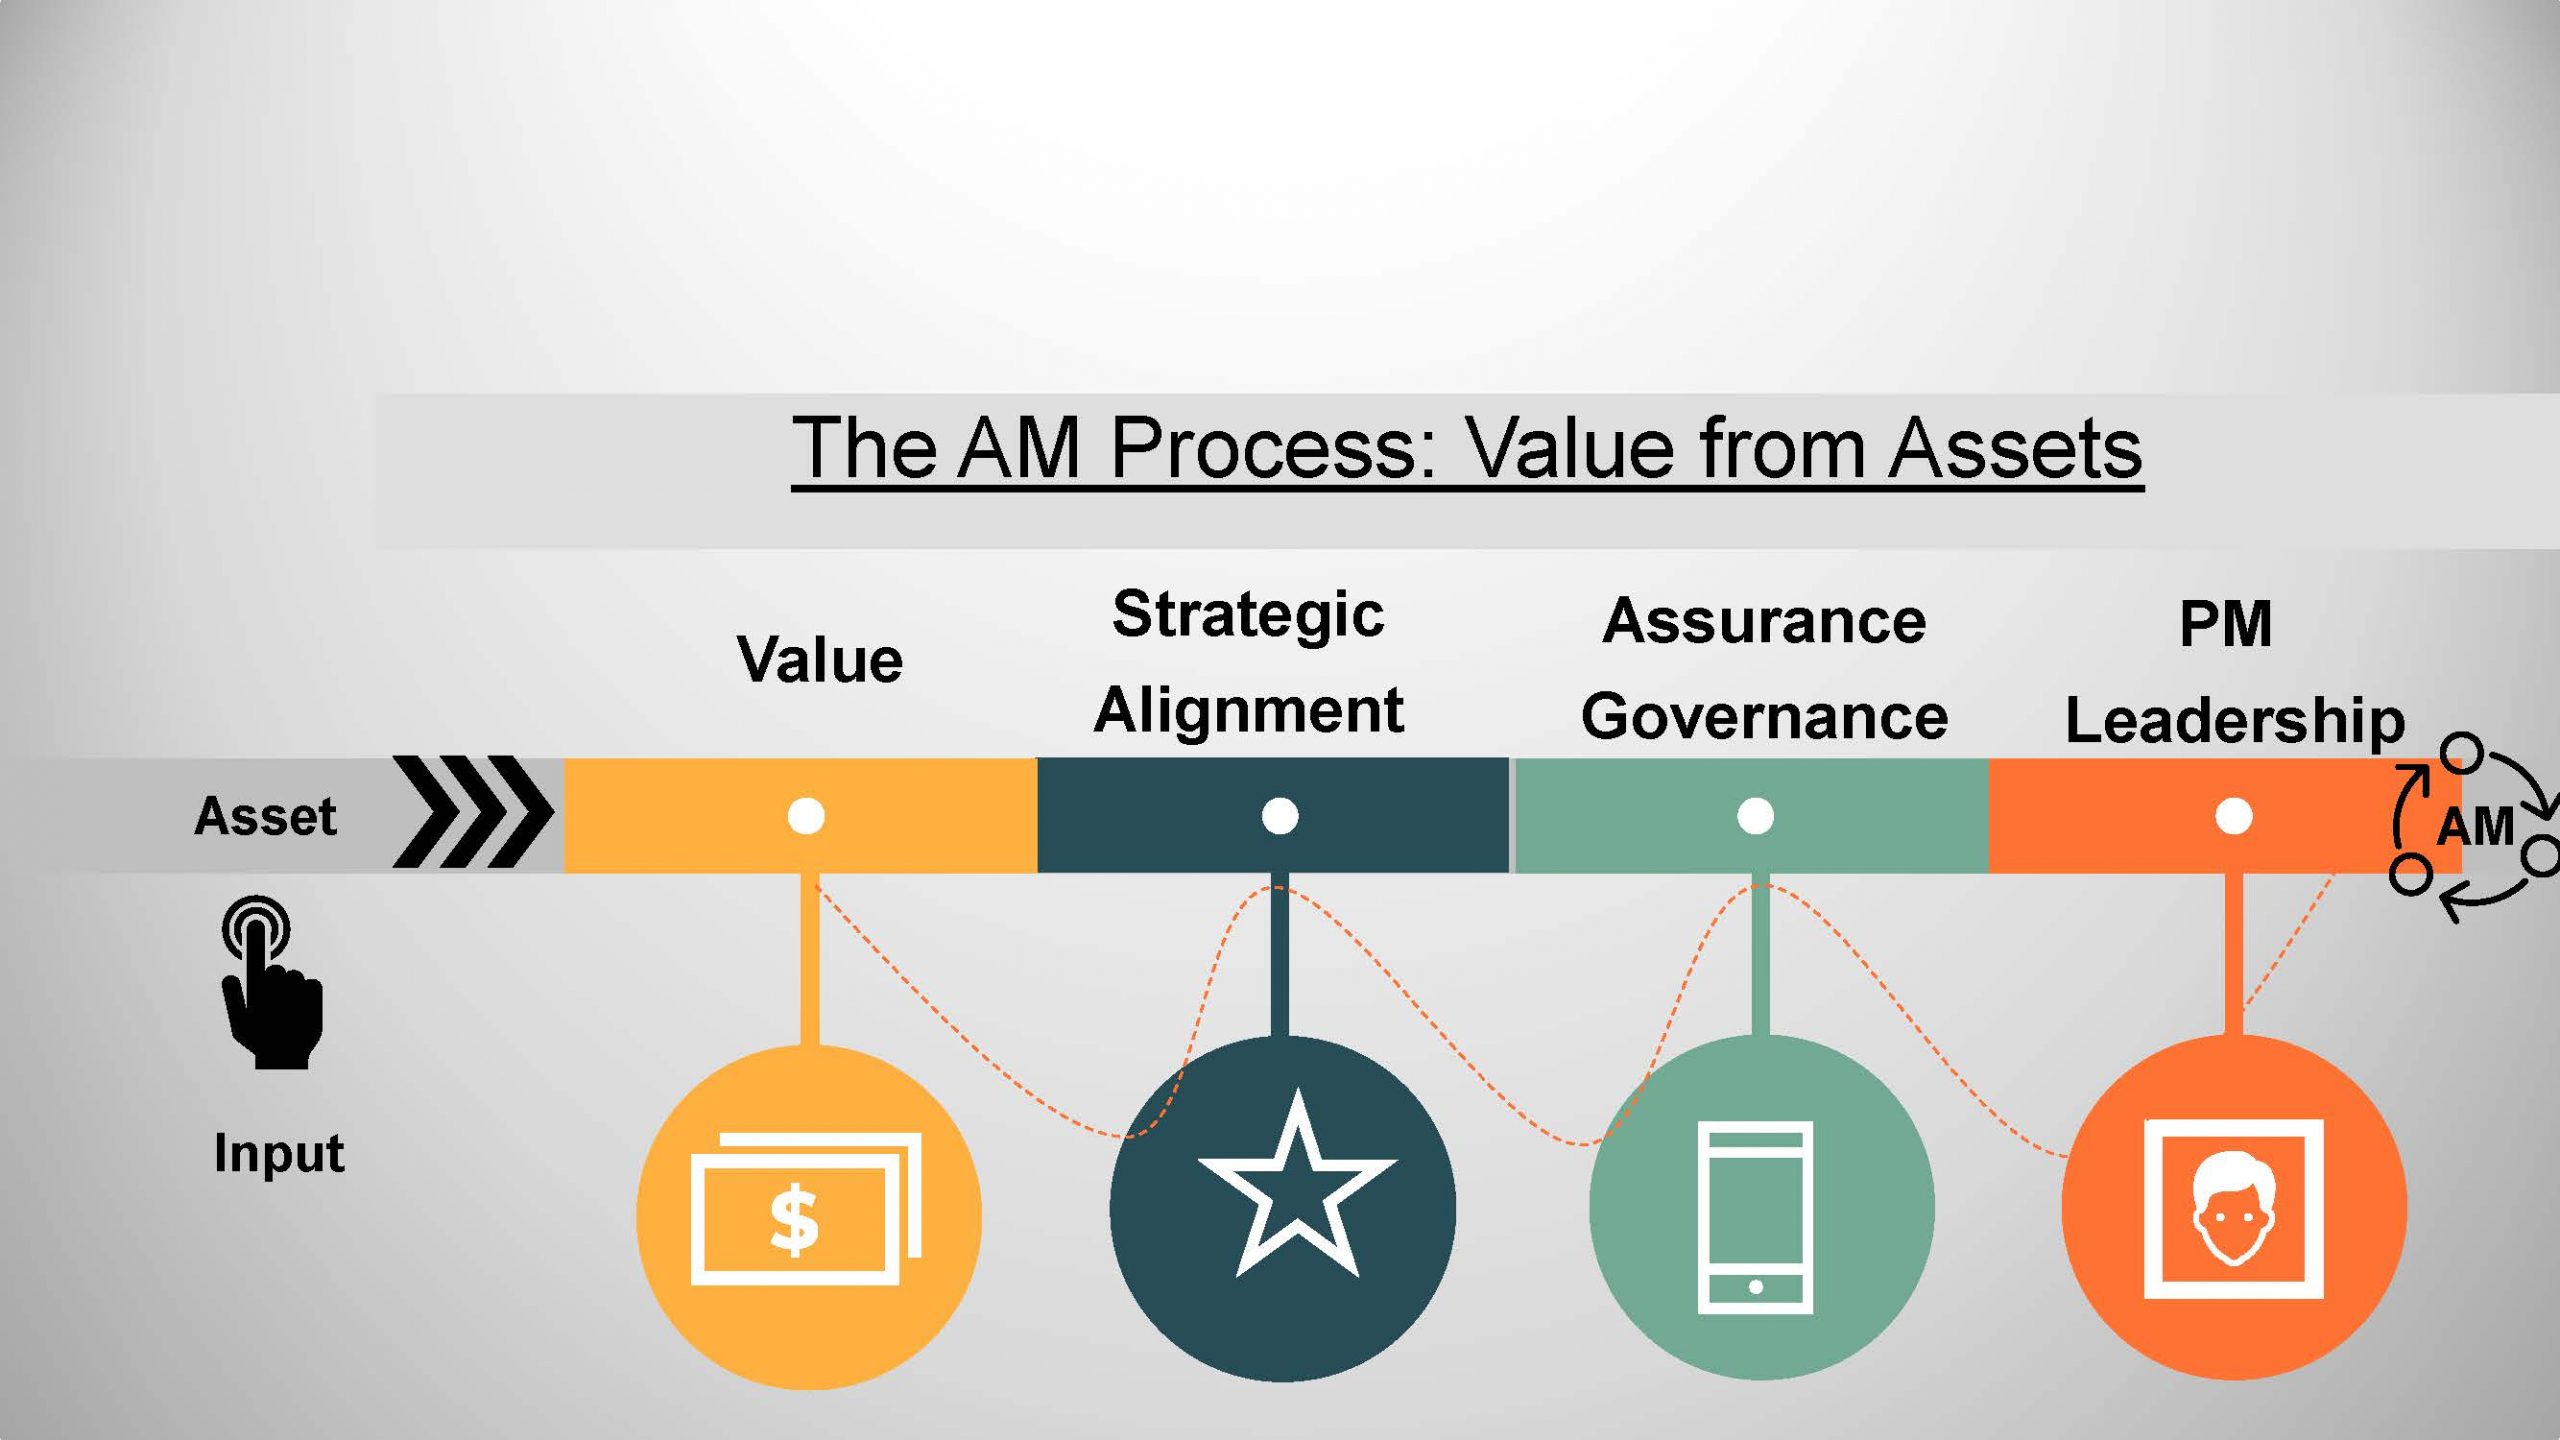 The linear diagram specifies how value is derives from assets. Starting from the left, after inputting the asset you account for its value, how it strategically aligns with a proejct, assurance government and the project leadership. This is a continuous process.